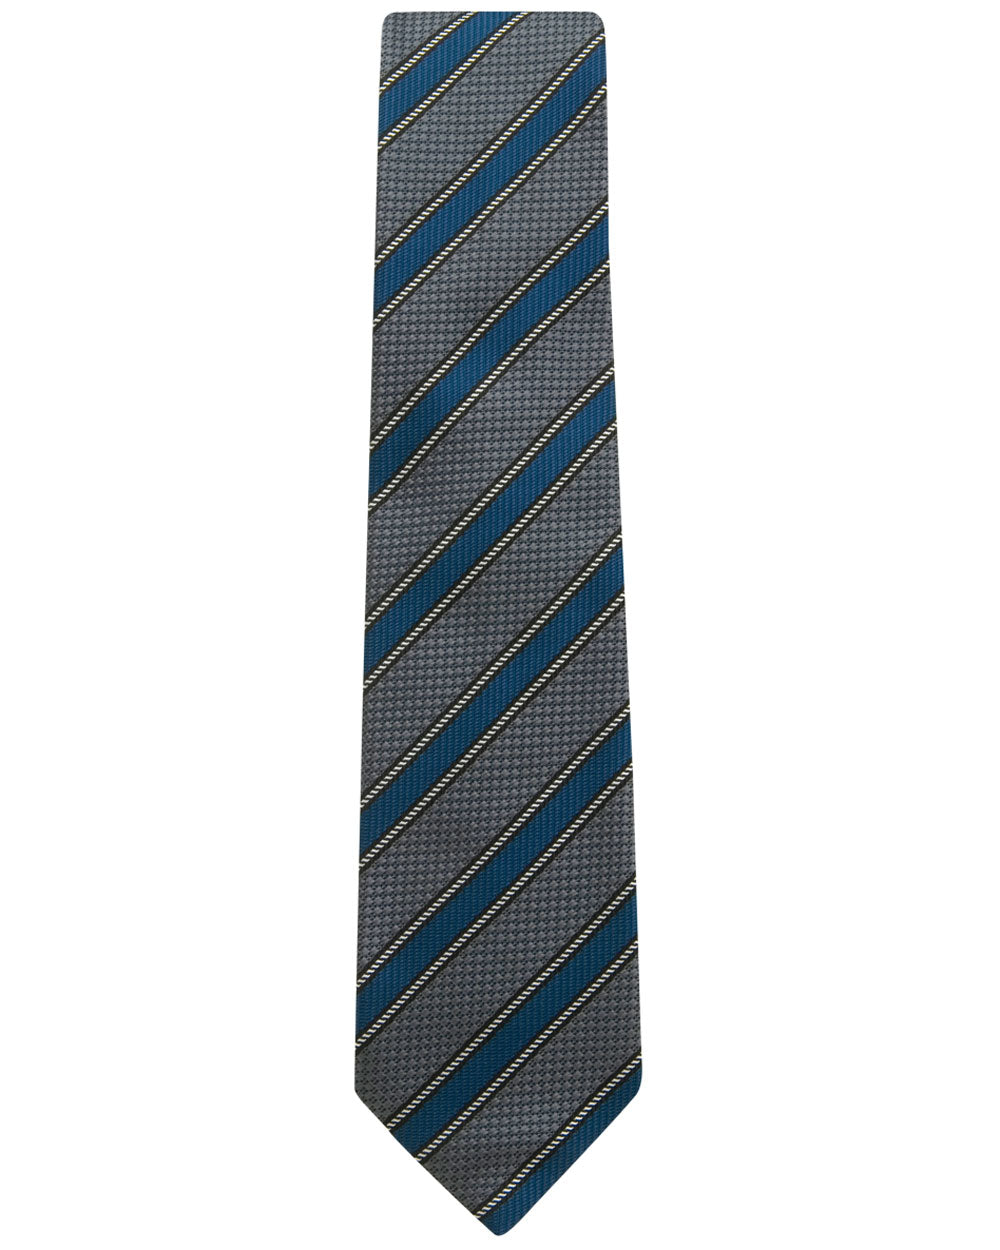 Flannel and Blue Silk Tie